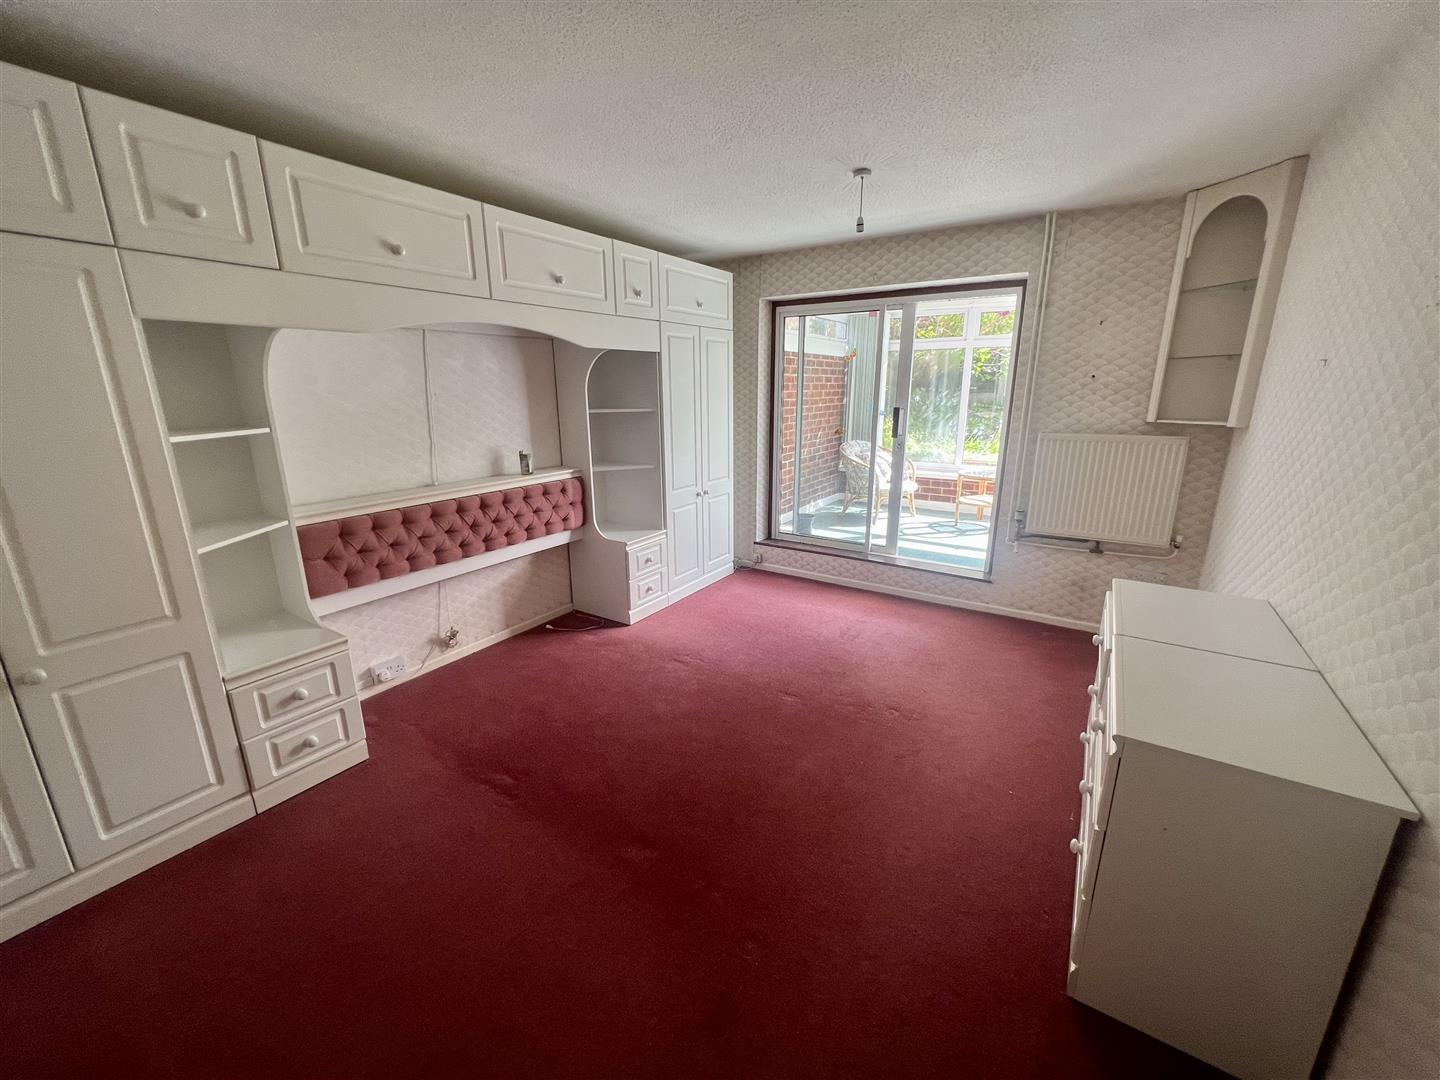 view of an empty room with cabinets